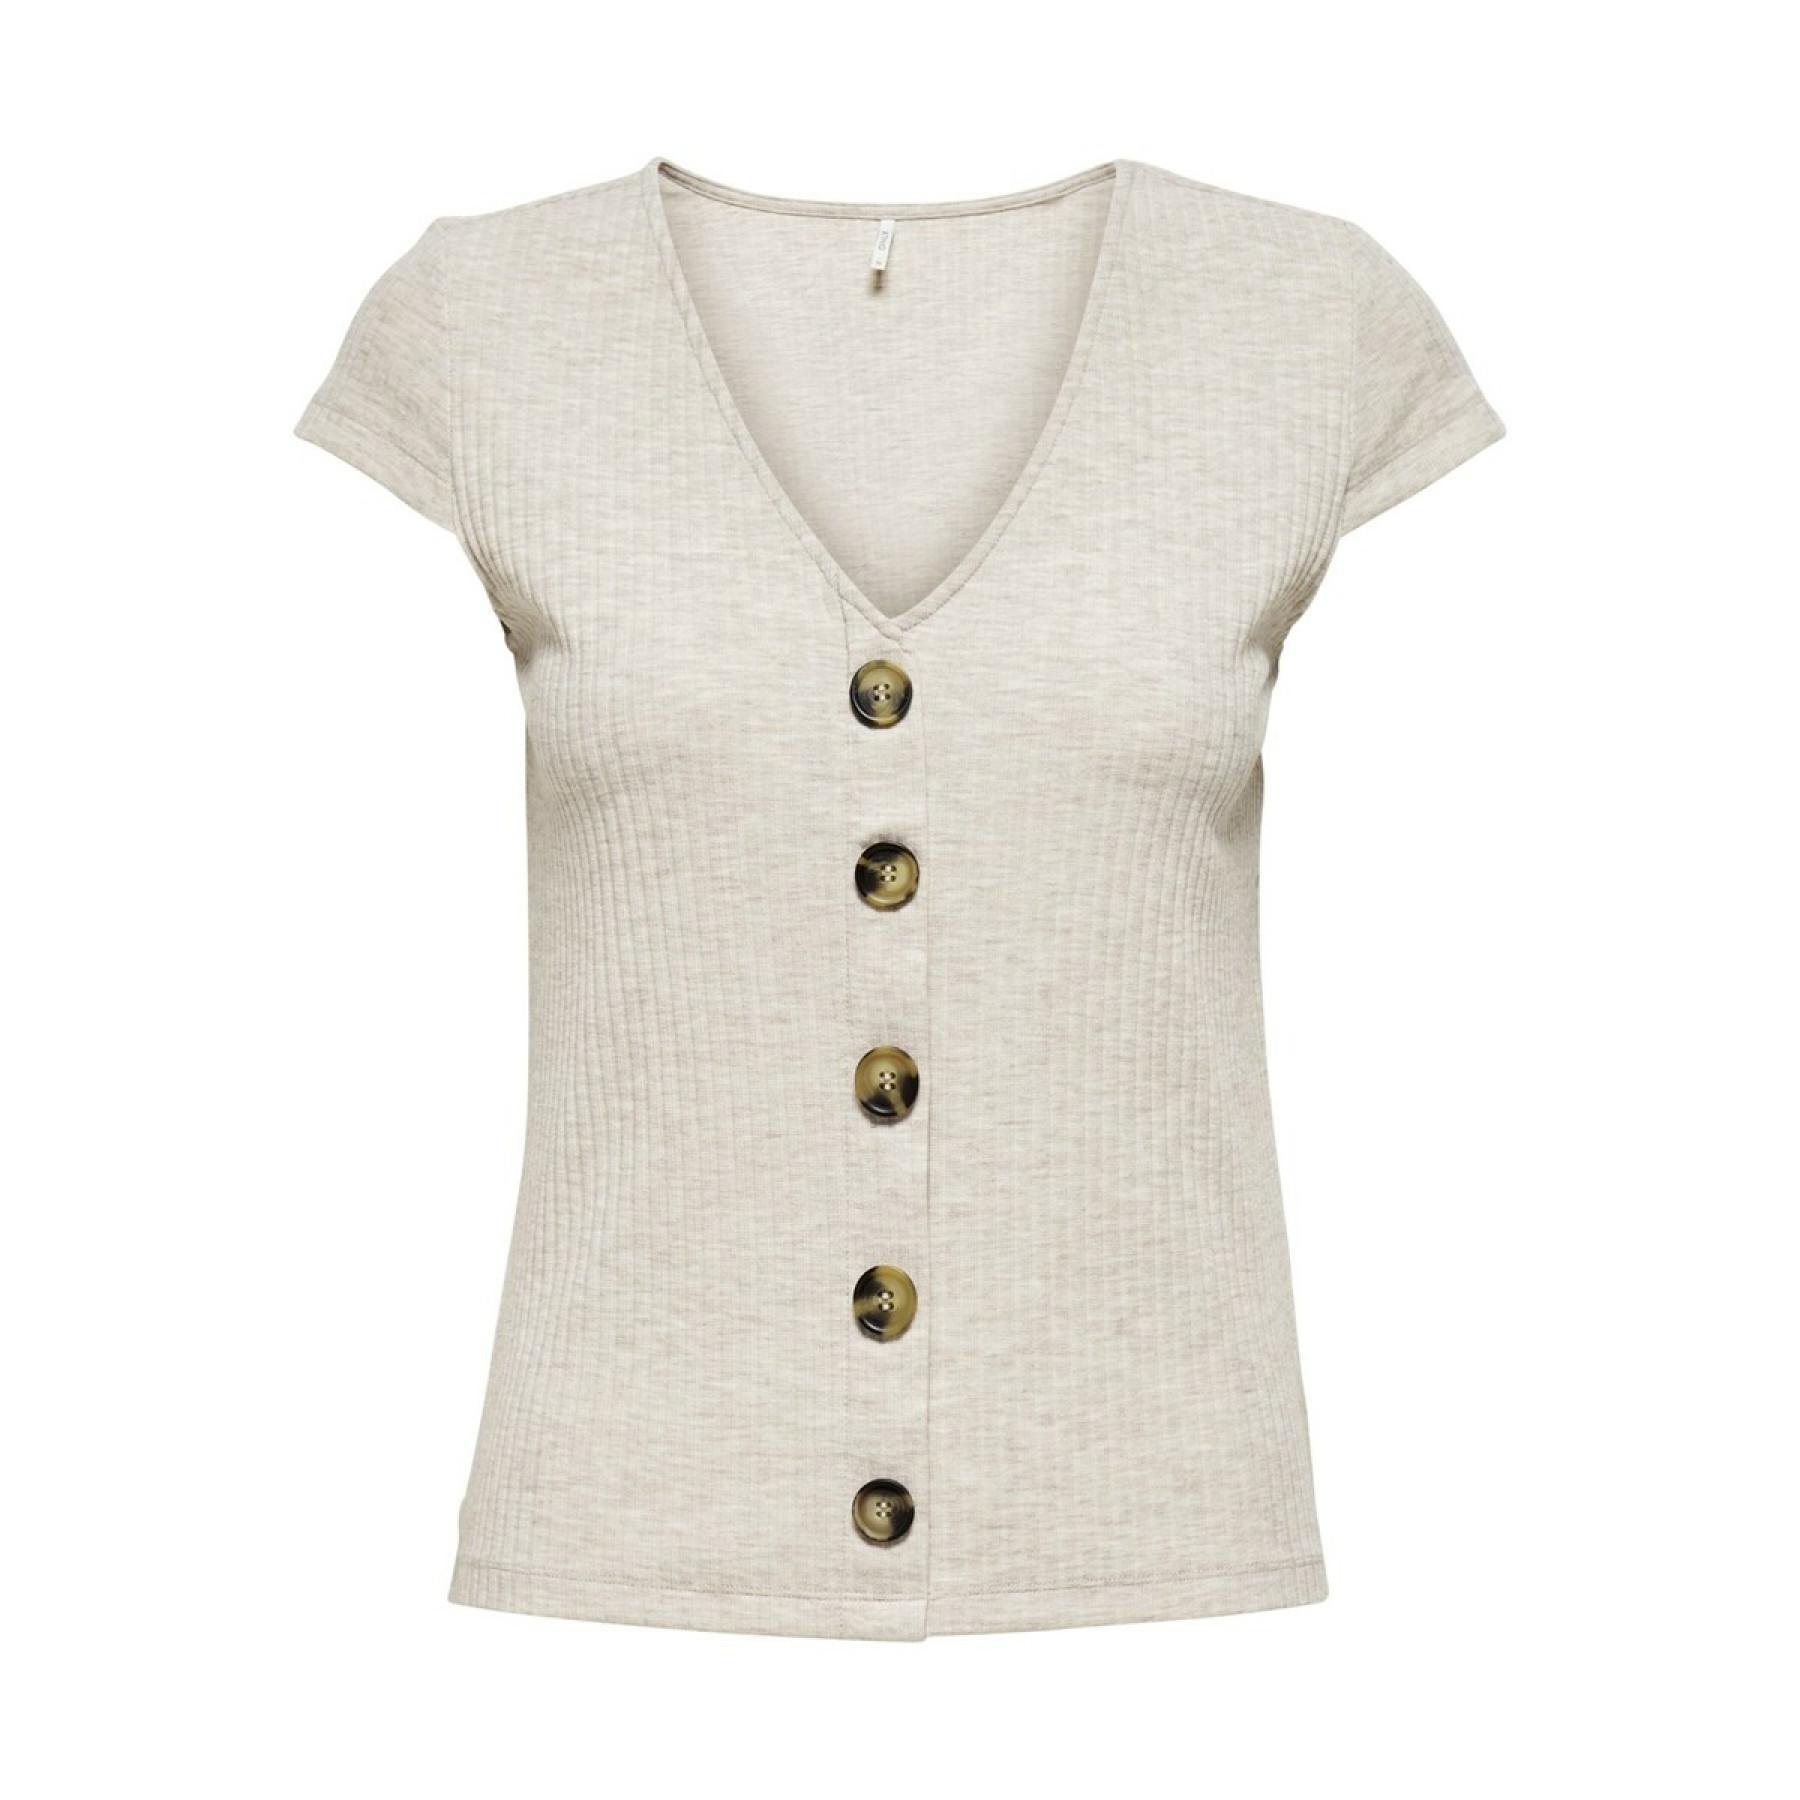 Women's top Only Nella manches courtes col à boutons